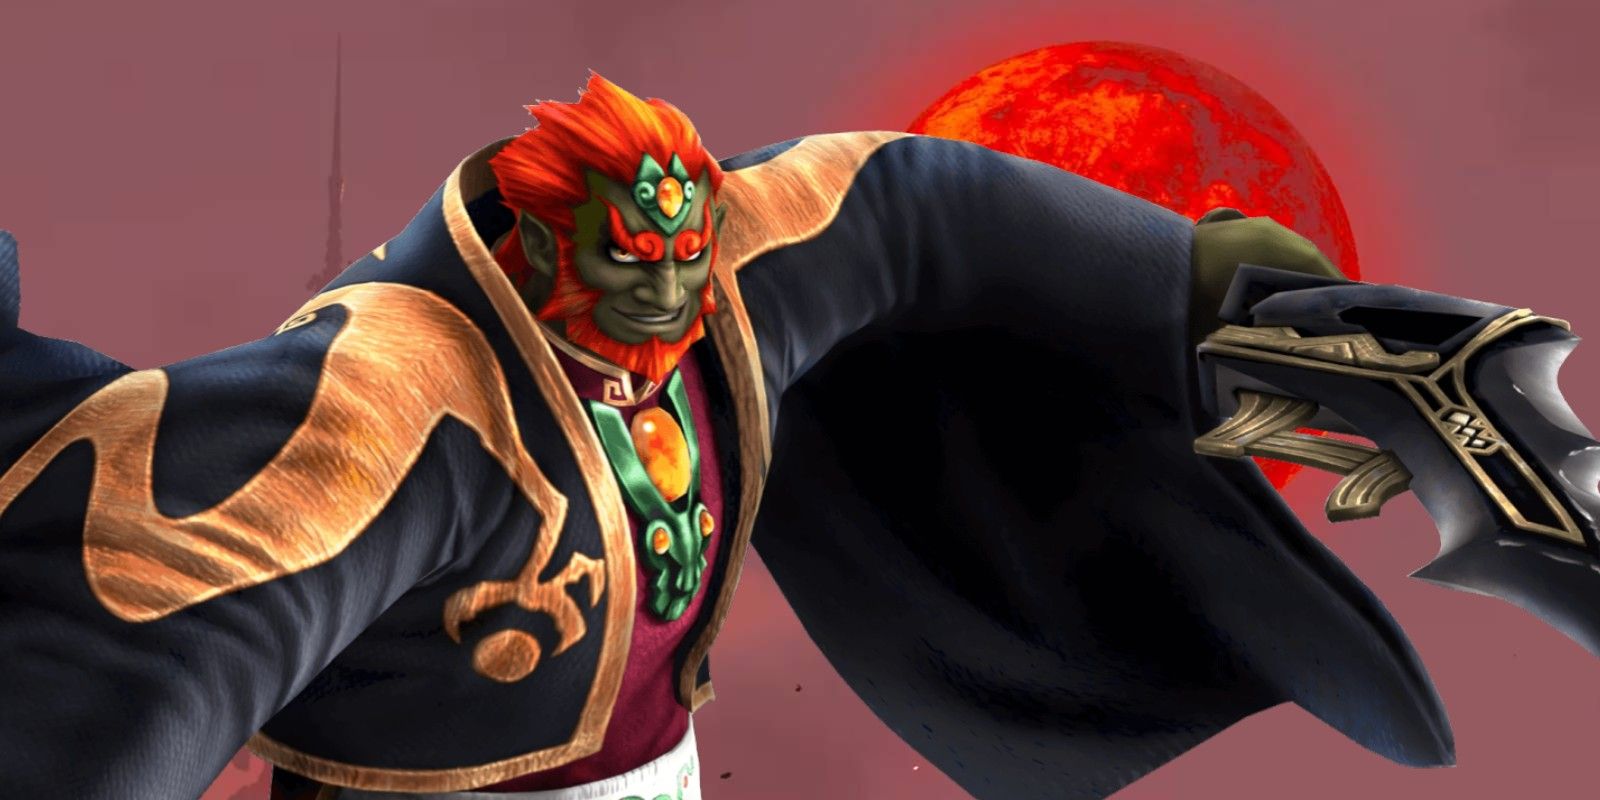 Ganondorf over an image of the Blood Moon from BOTW.